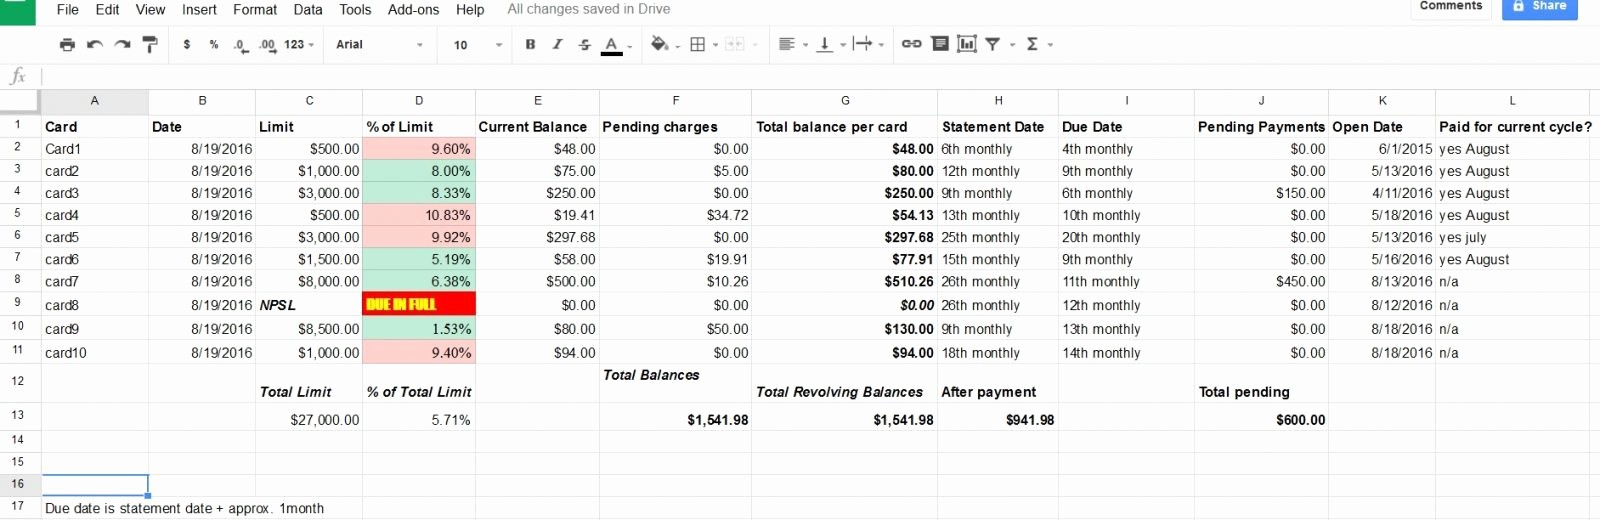 Credit Card Payment Tracking Spreadsheet Awesome Credit Card Payment Tracking Spreadsheet as Inventory